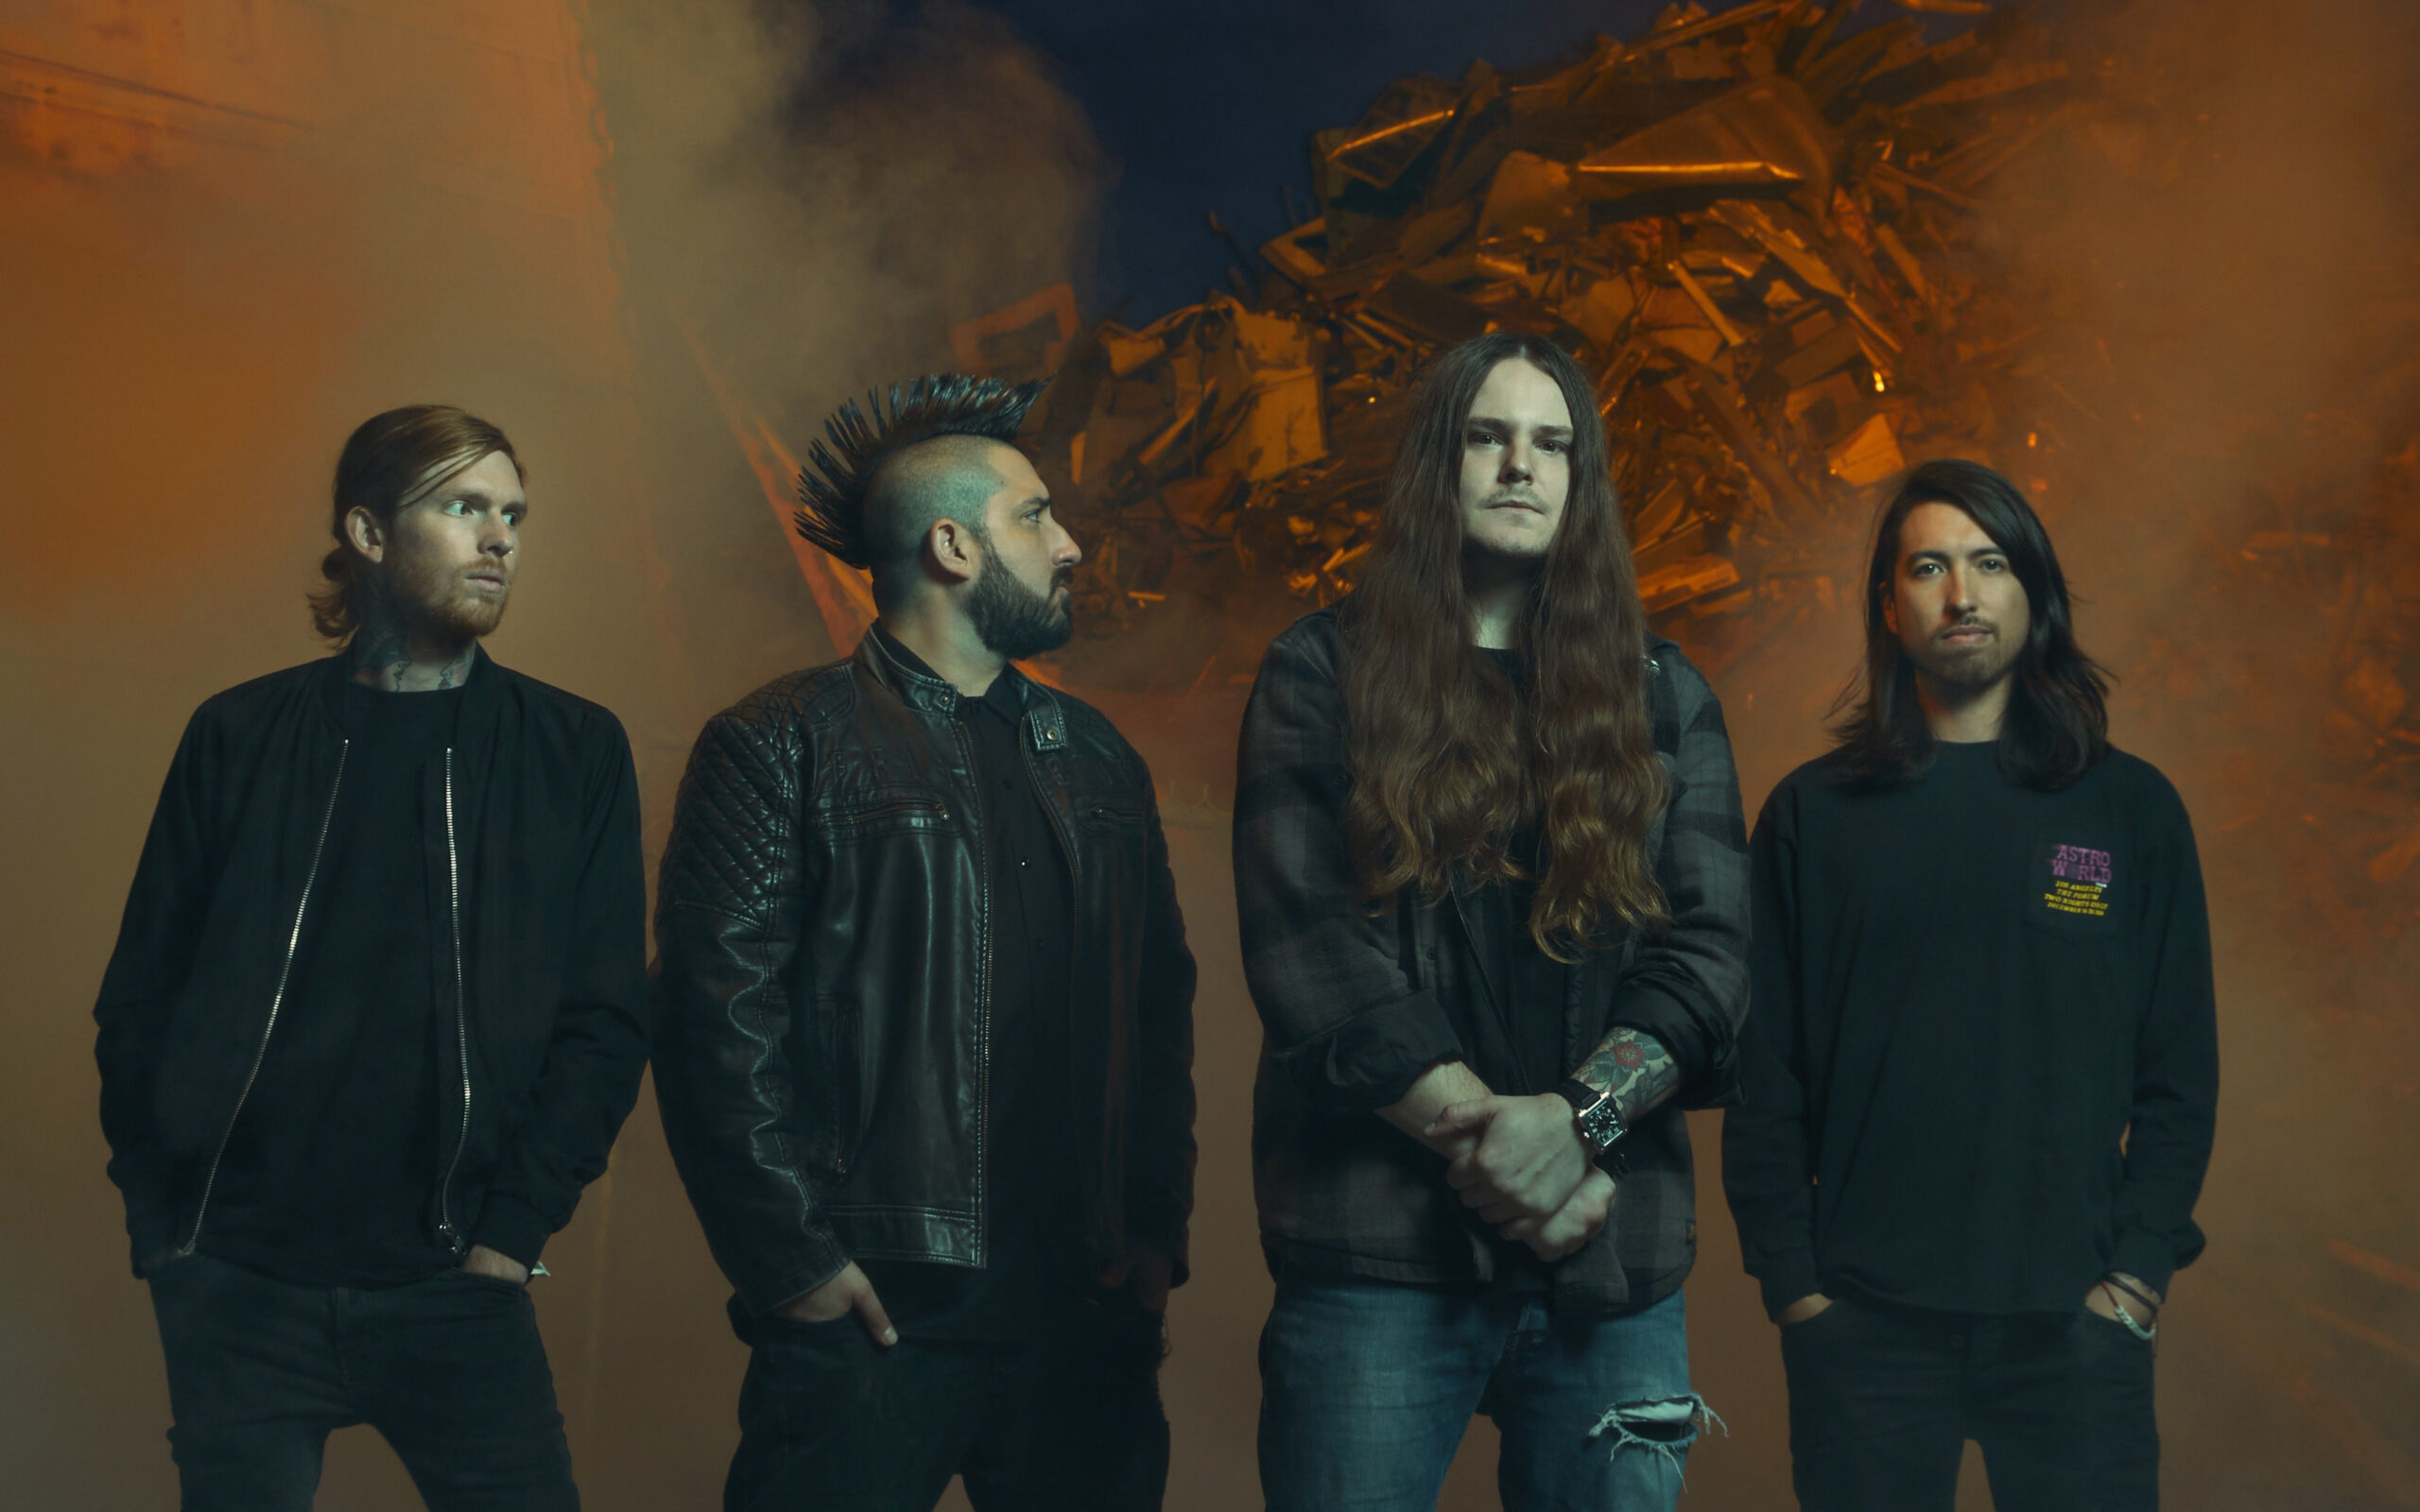 OF MICE & MEN’S AARON PAULEY RELEASED FROM HOSPITAL AFTER “ONE OF THE SCARIEST DAYS OF MY LIFE”